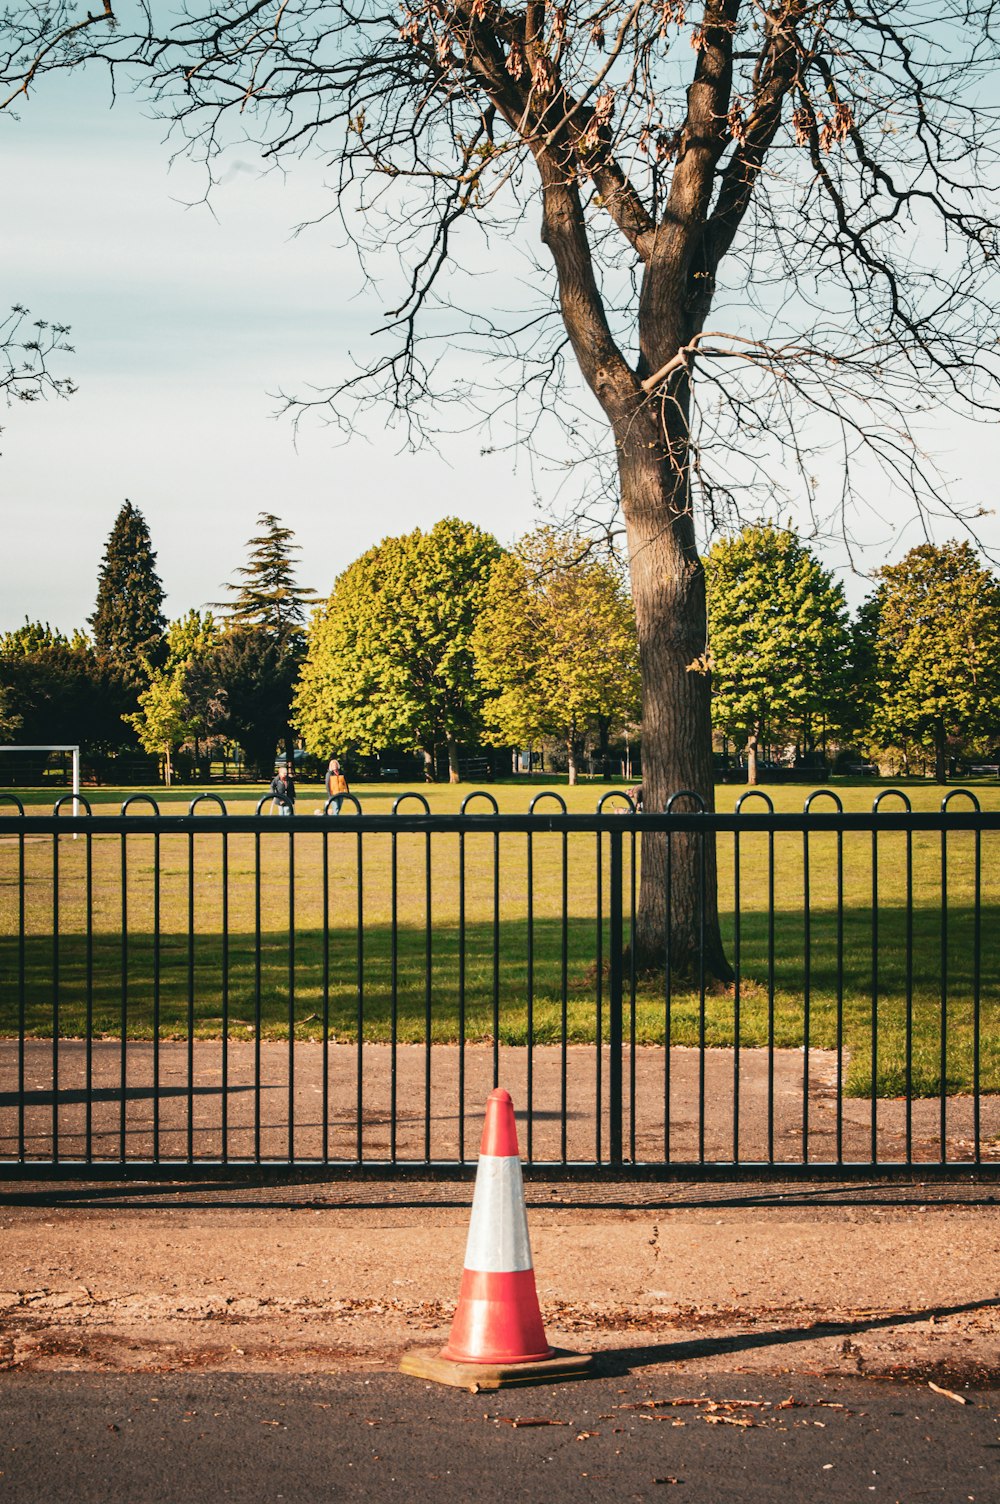 a traffic cone sitting in the middle of a park